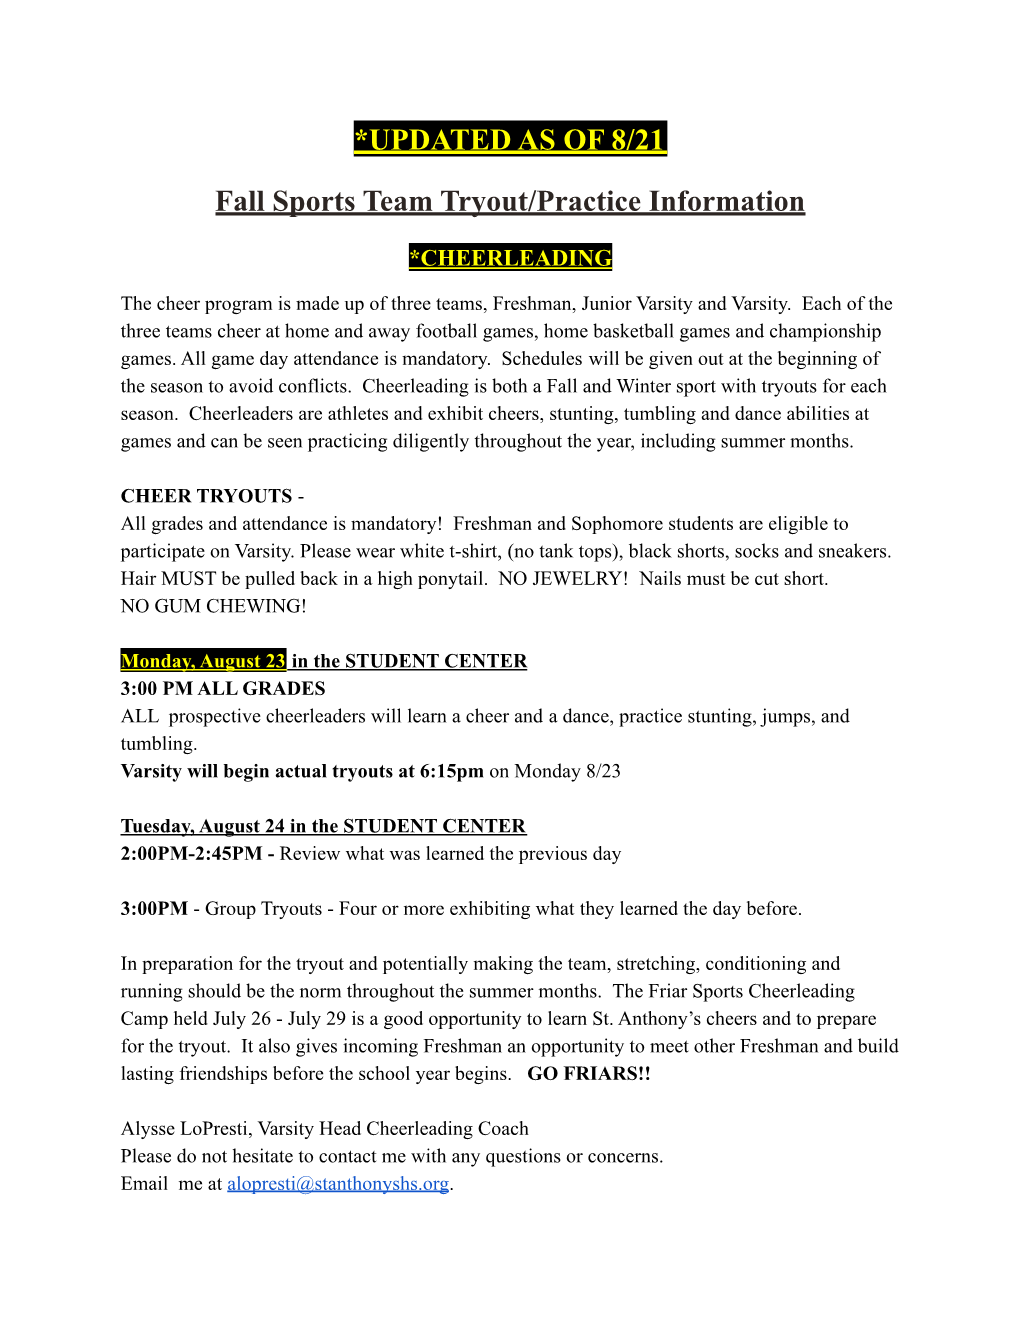 Updated Fall Sports Information